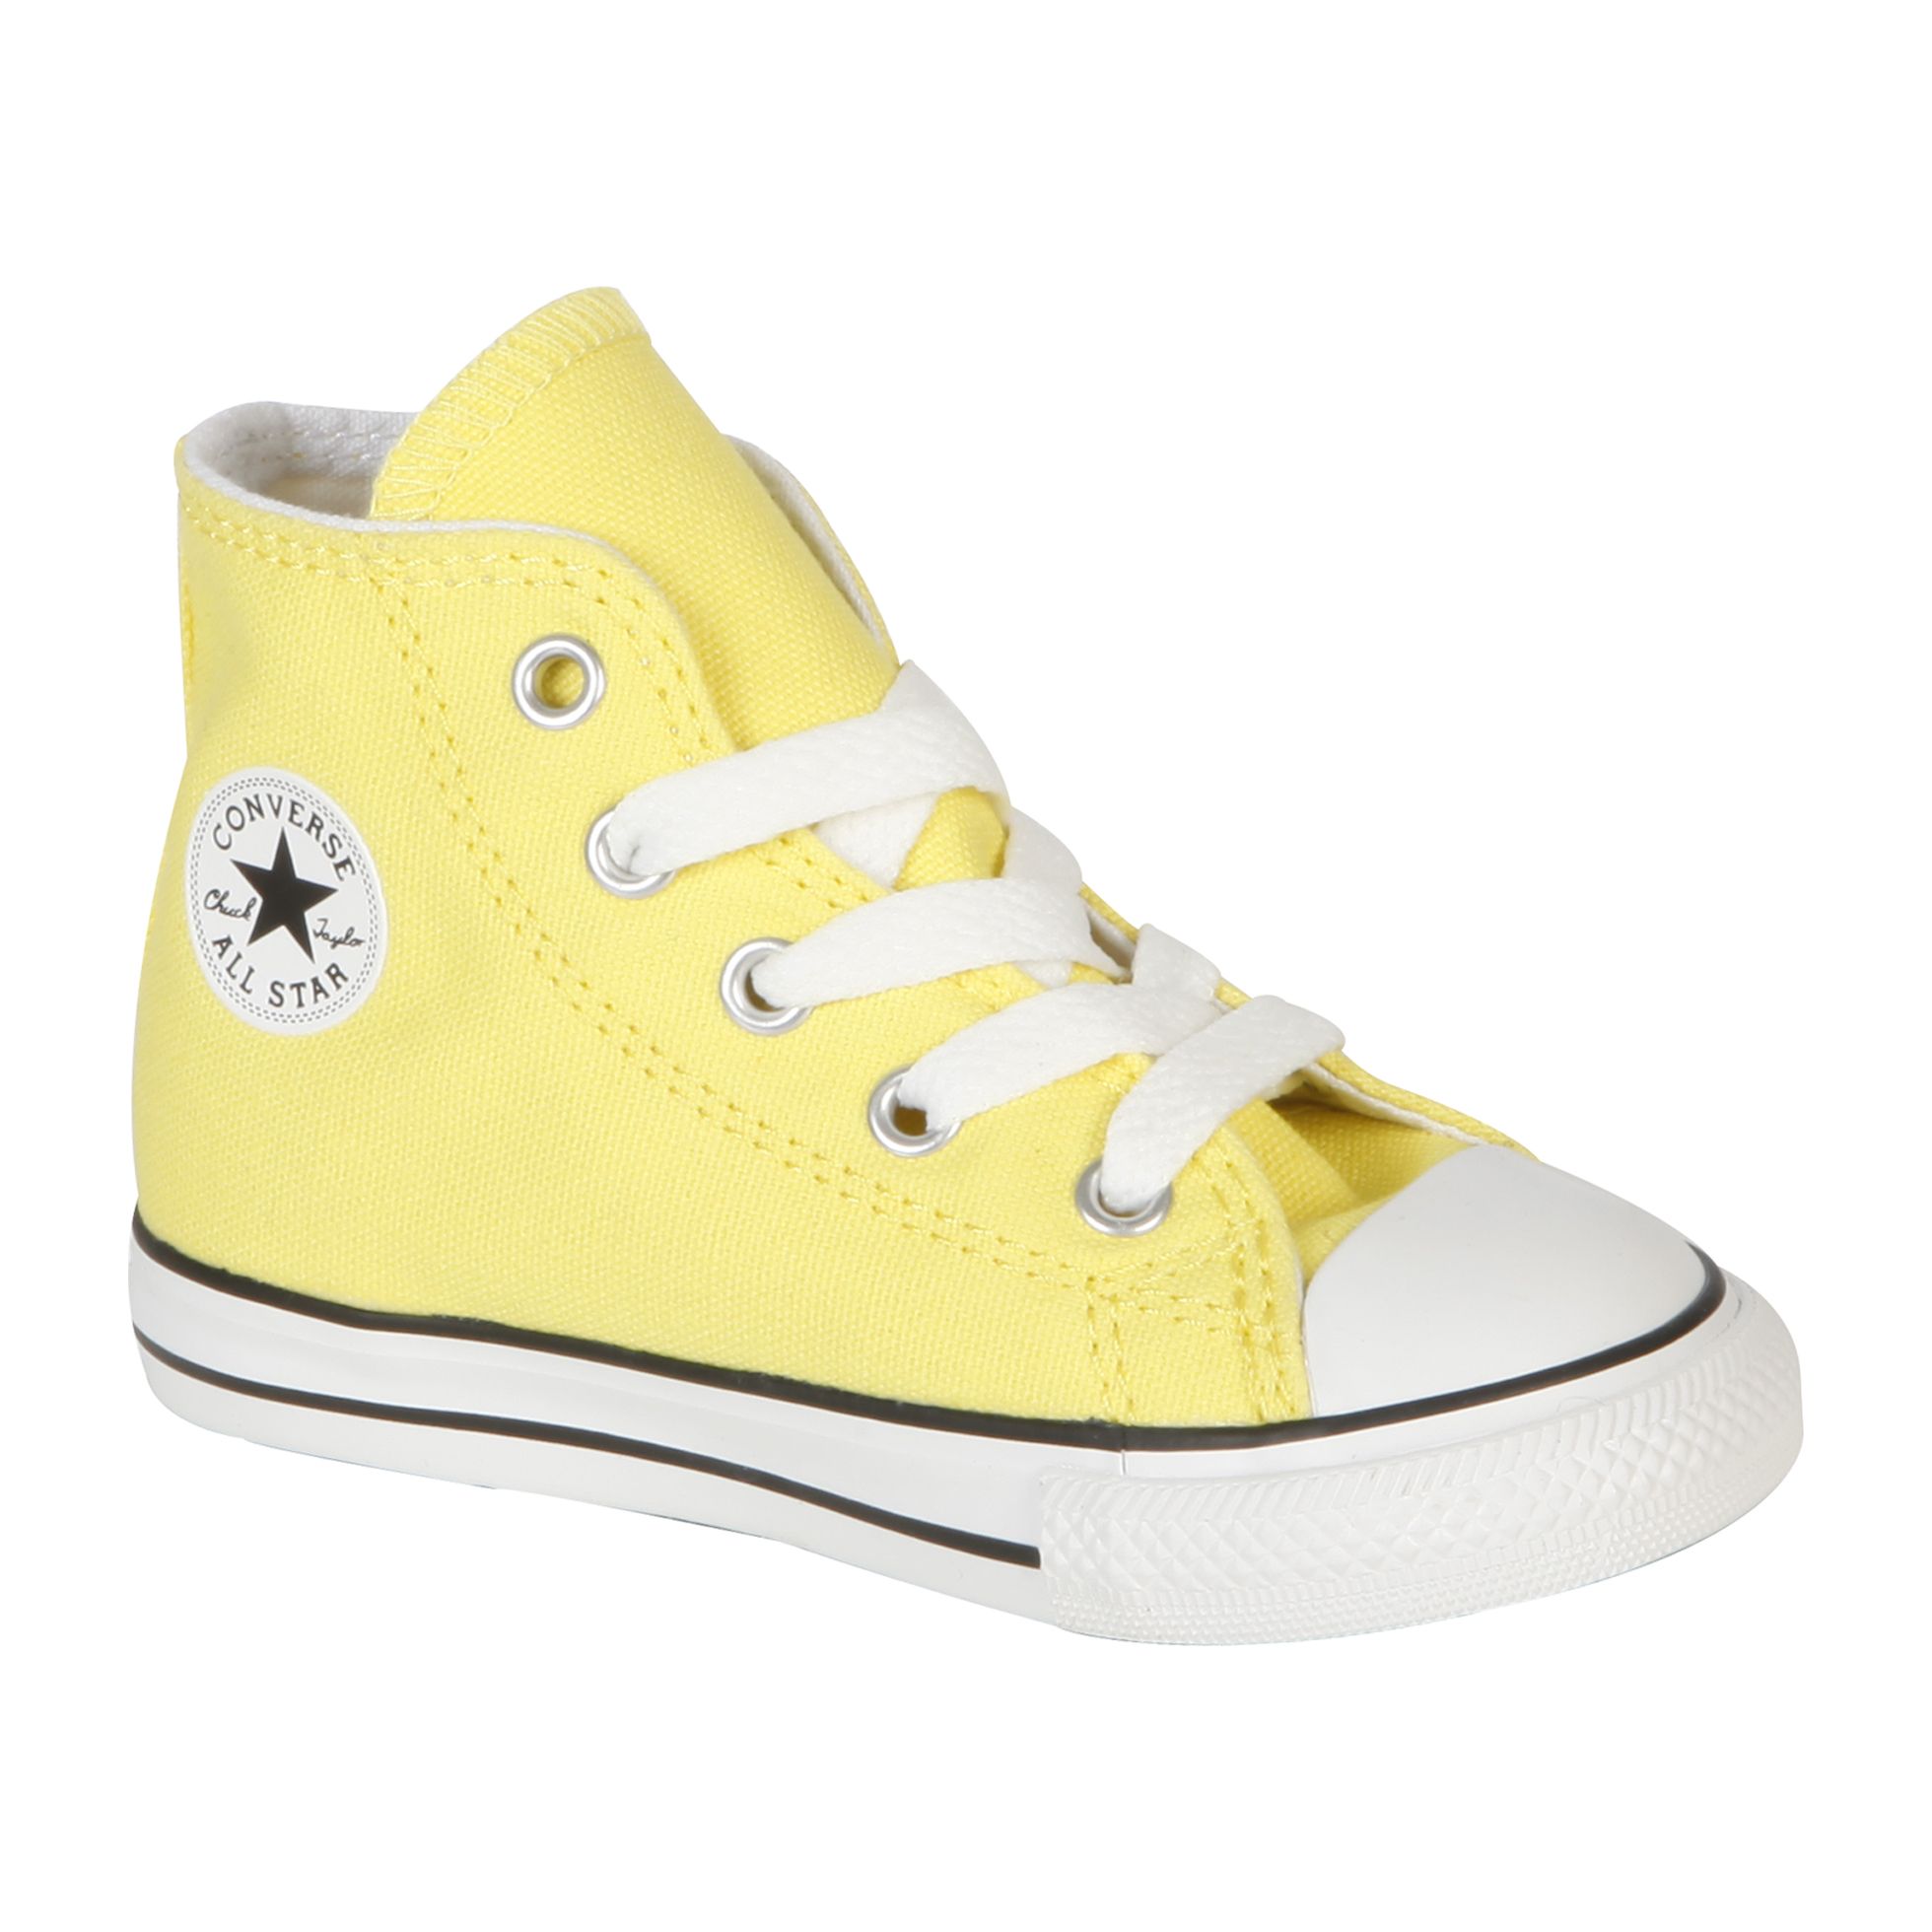 yellow converse toddler, OFF 79%,Buy!